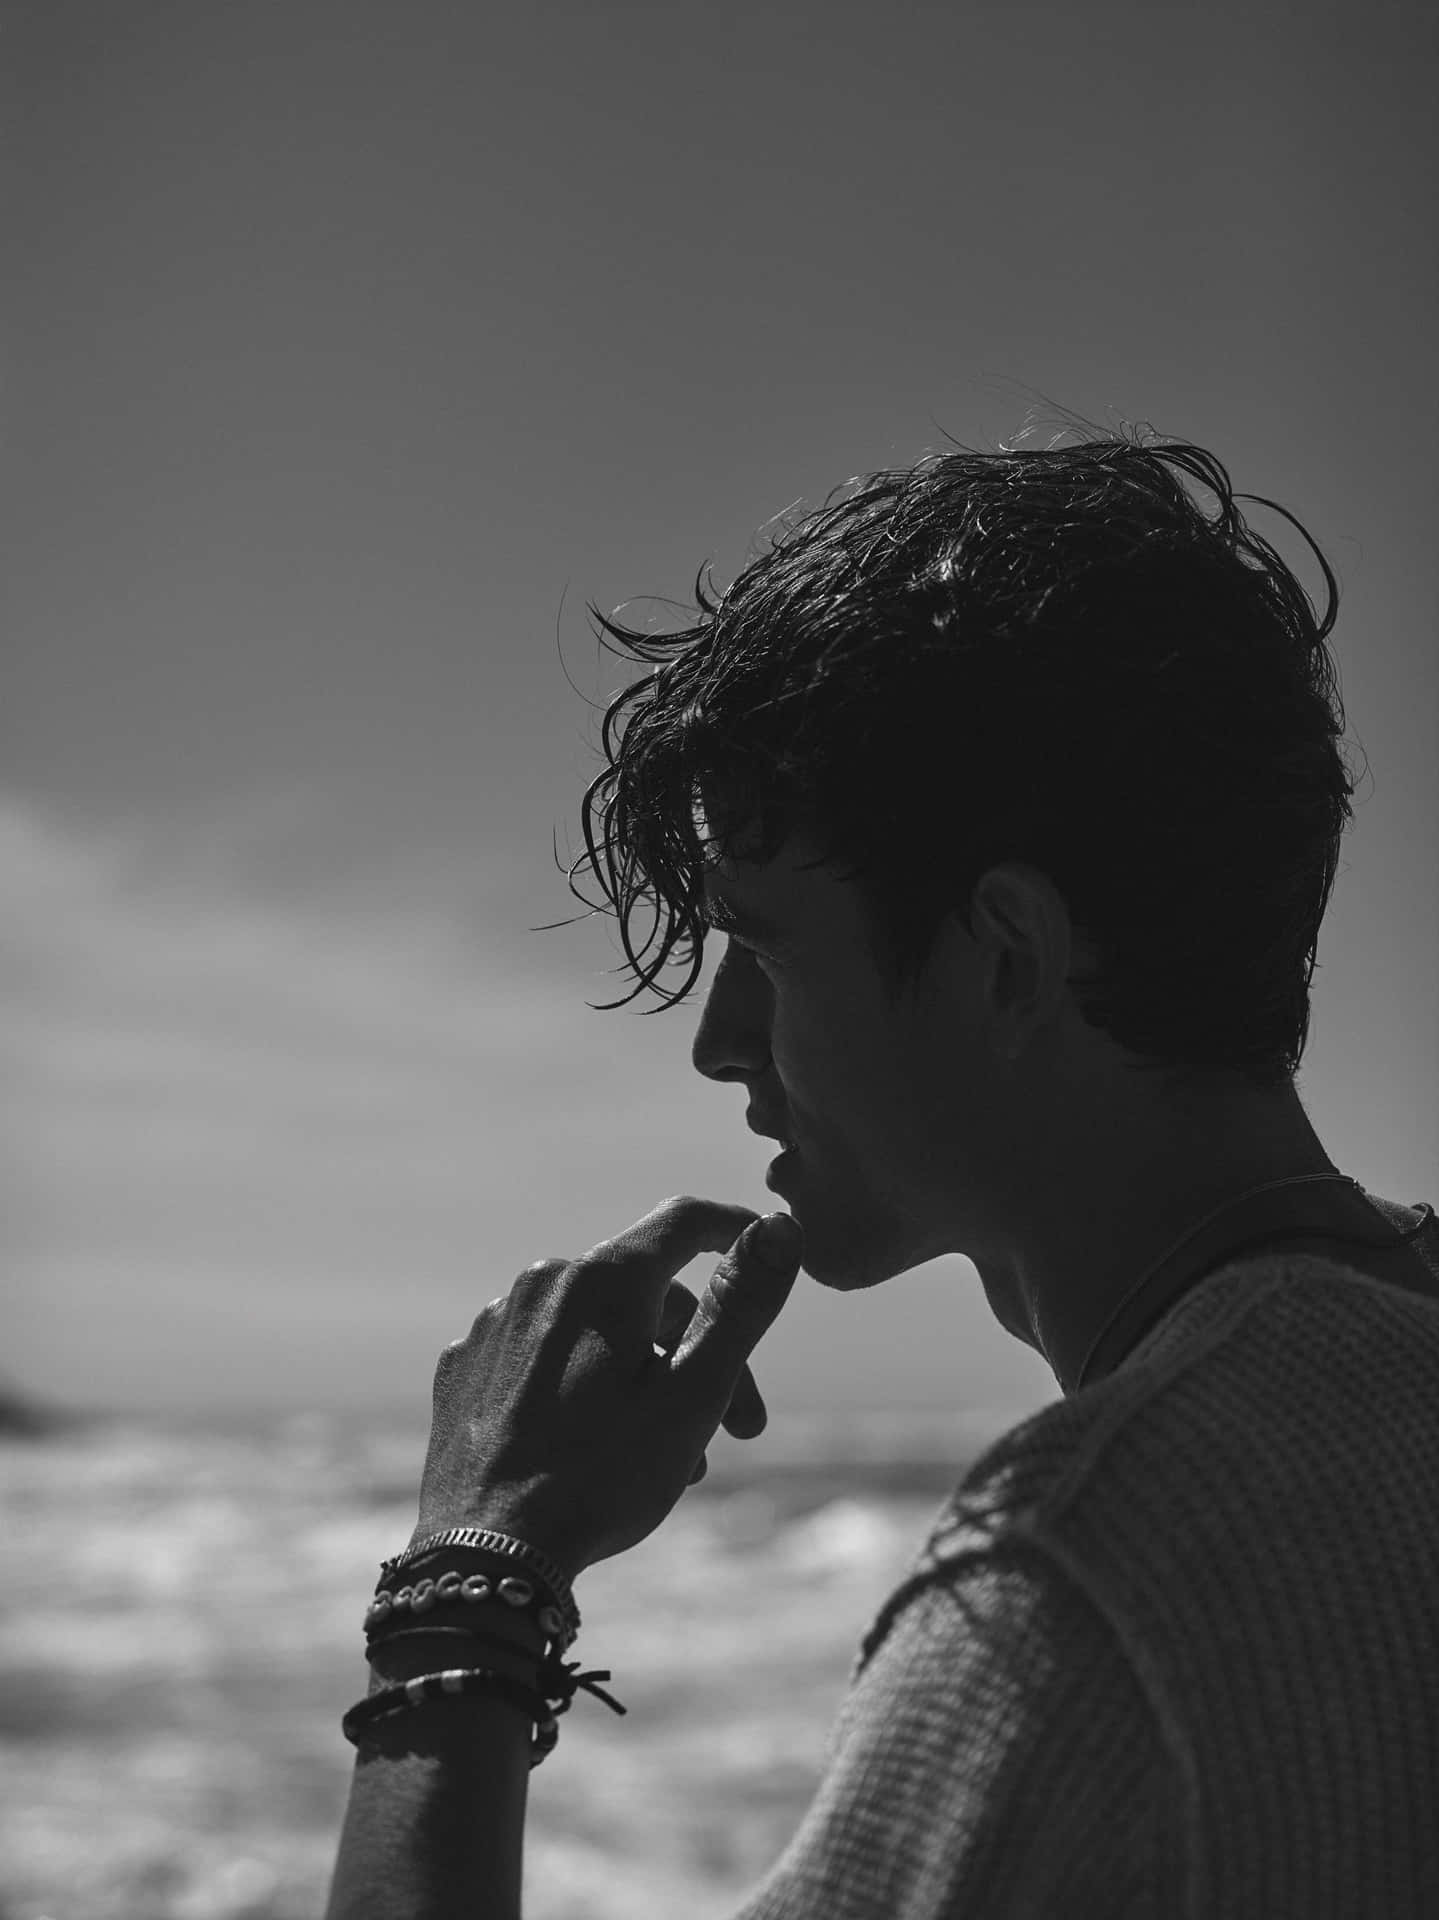 A Man Is Looking At The Ocean While Smoking A Cigarette